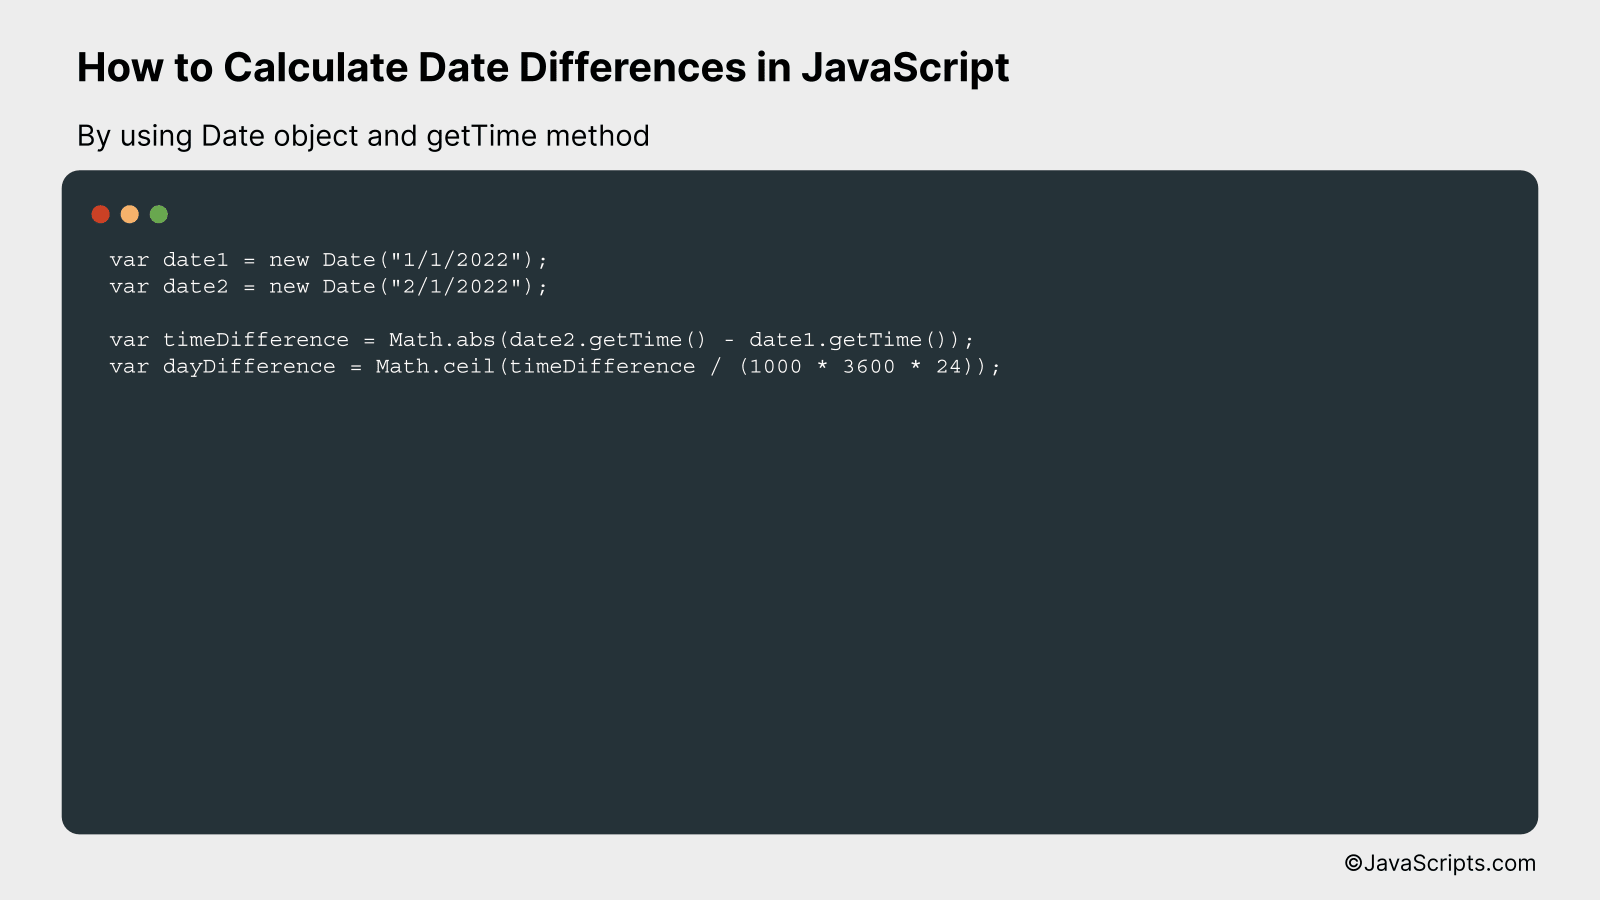 By using Date object and getTime method